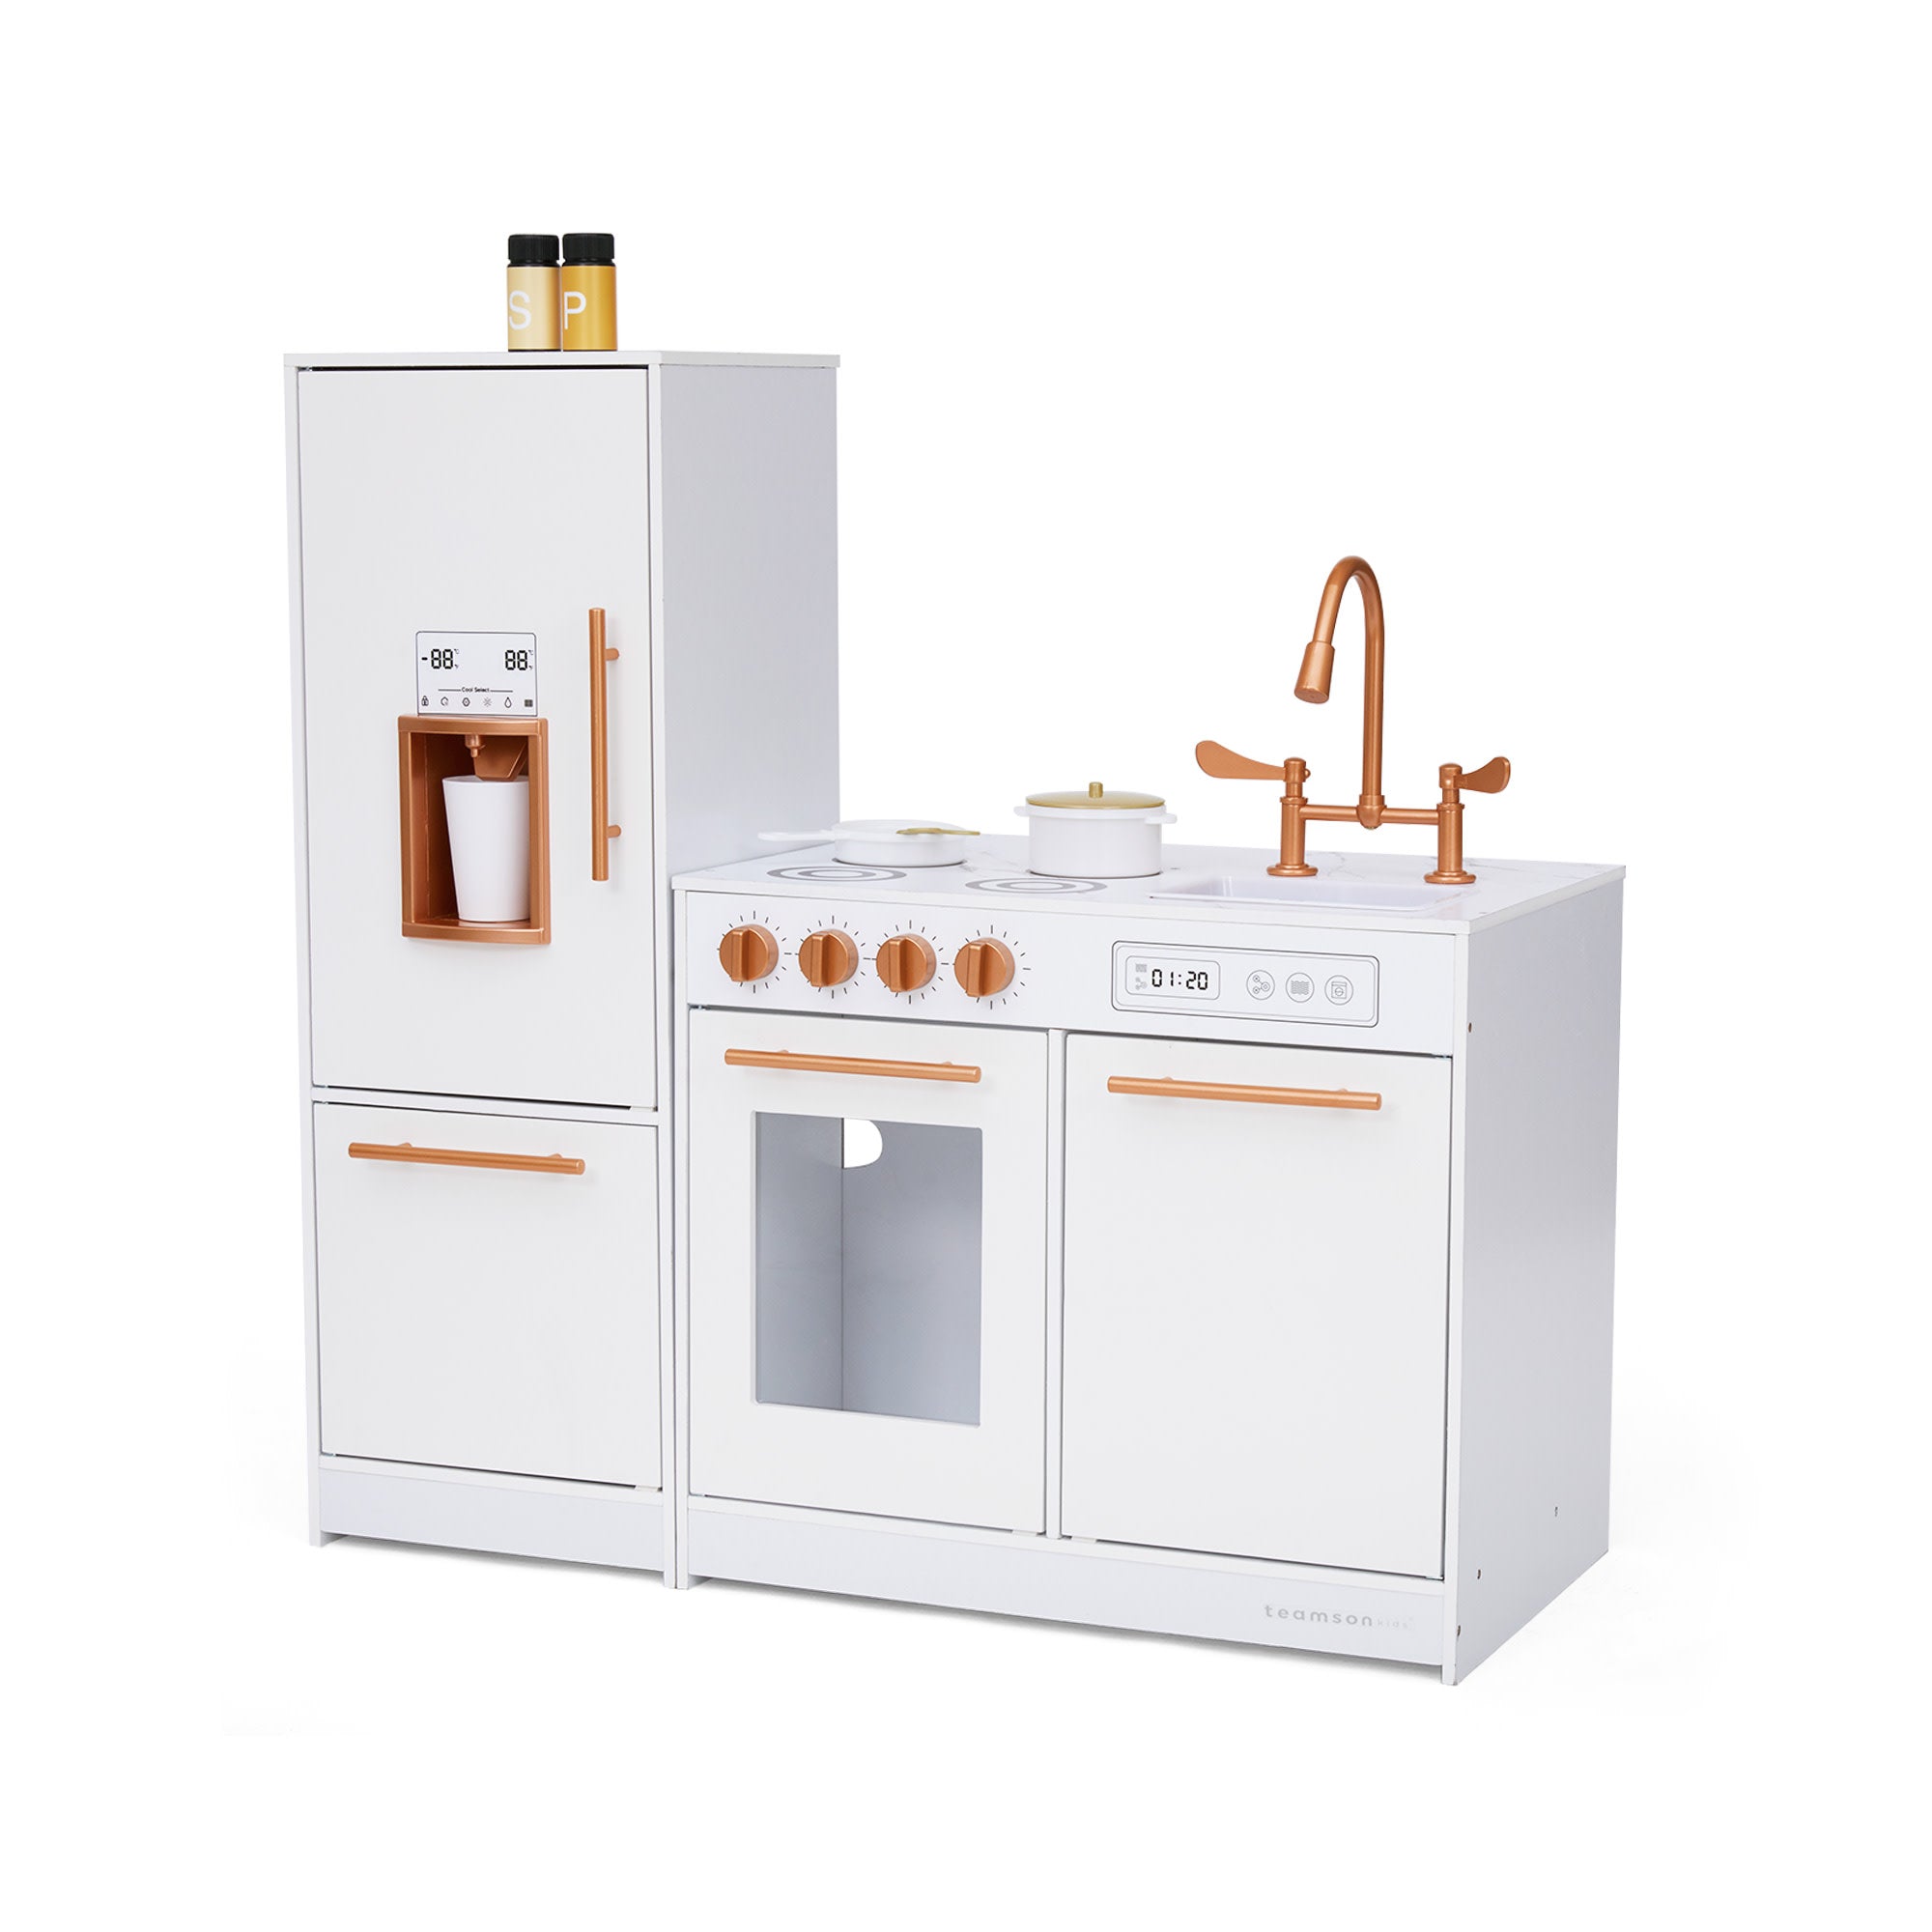 Little Chef Milano Two-Piece Modular Modern Delight Play Kitchen with Cooking Accessories, Faux Marble Countertop, & Rose Gold Hardware, White